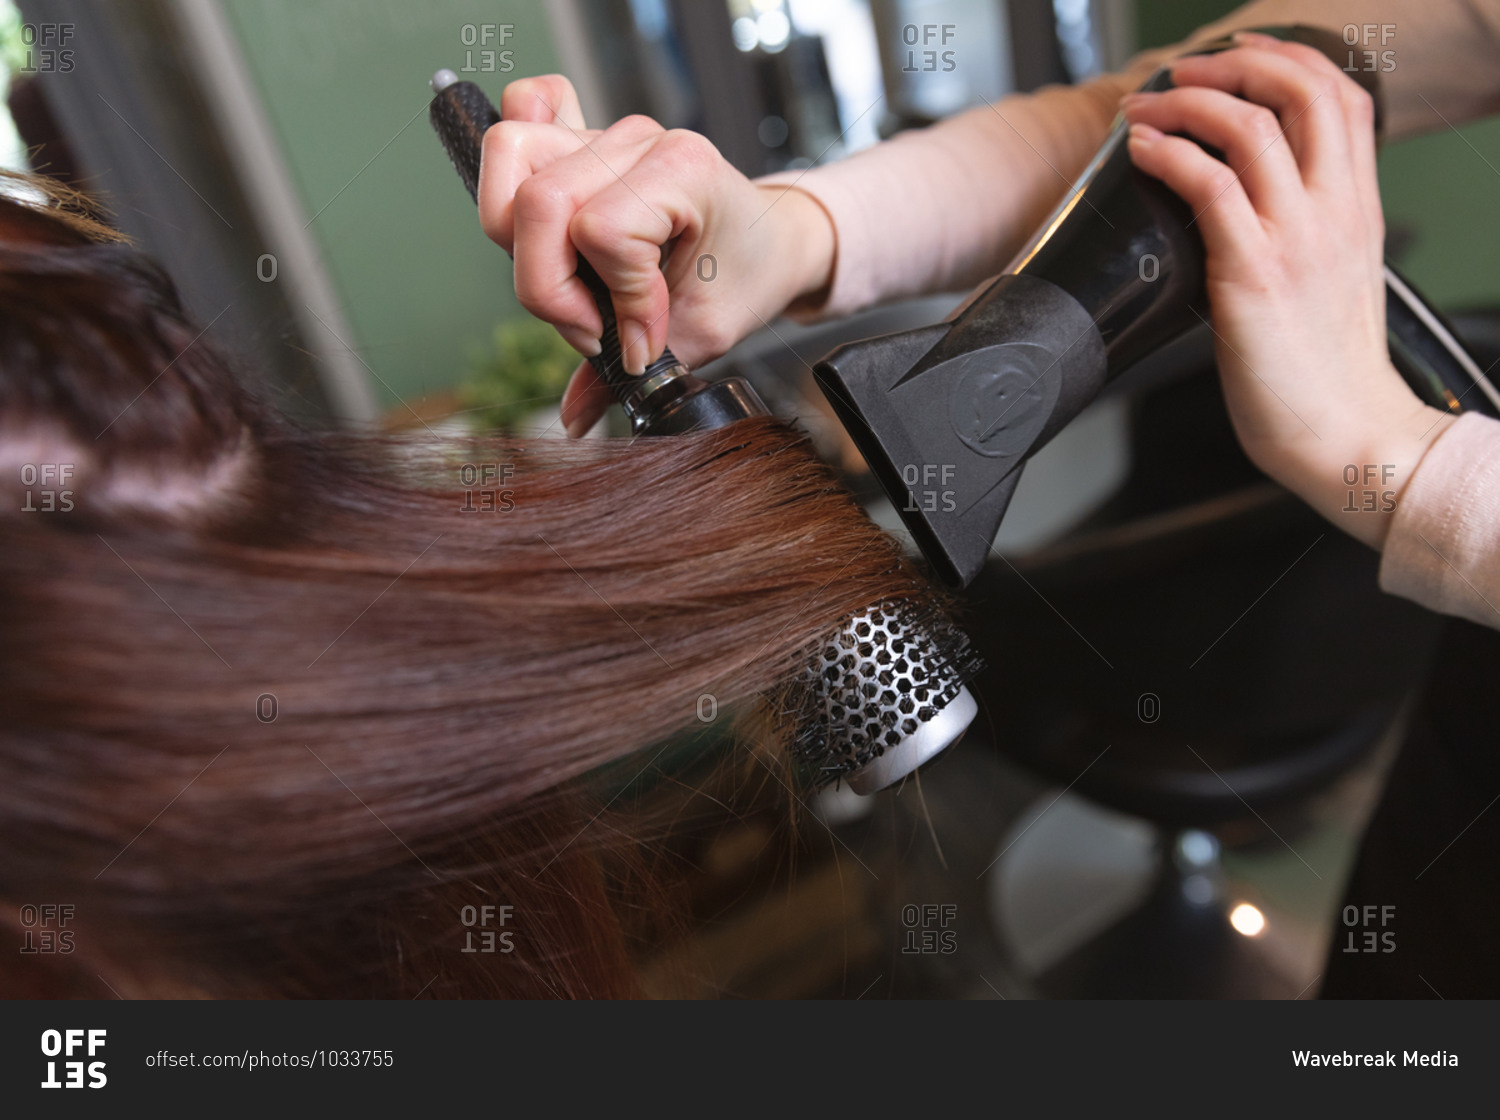 Hands of Caucasian female hairdresser working in hair salon, drying hair of female Caucasian customer. Health and hygiene in workplace during Coronavirus Covid 19 pandemic.